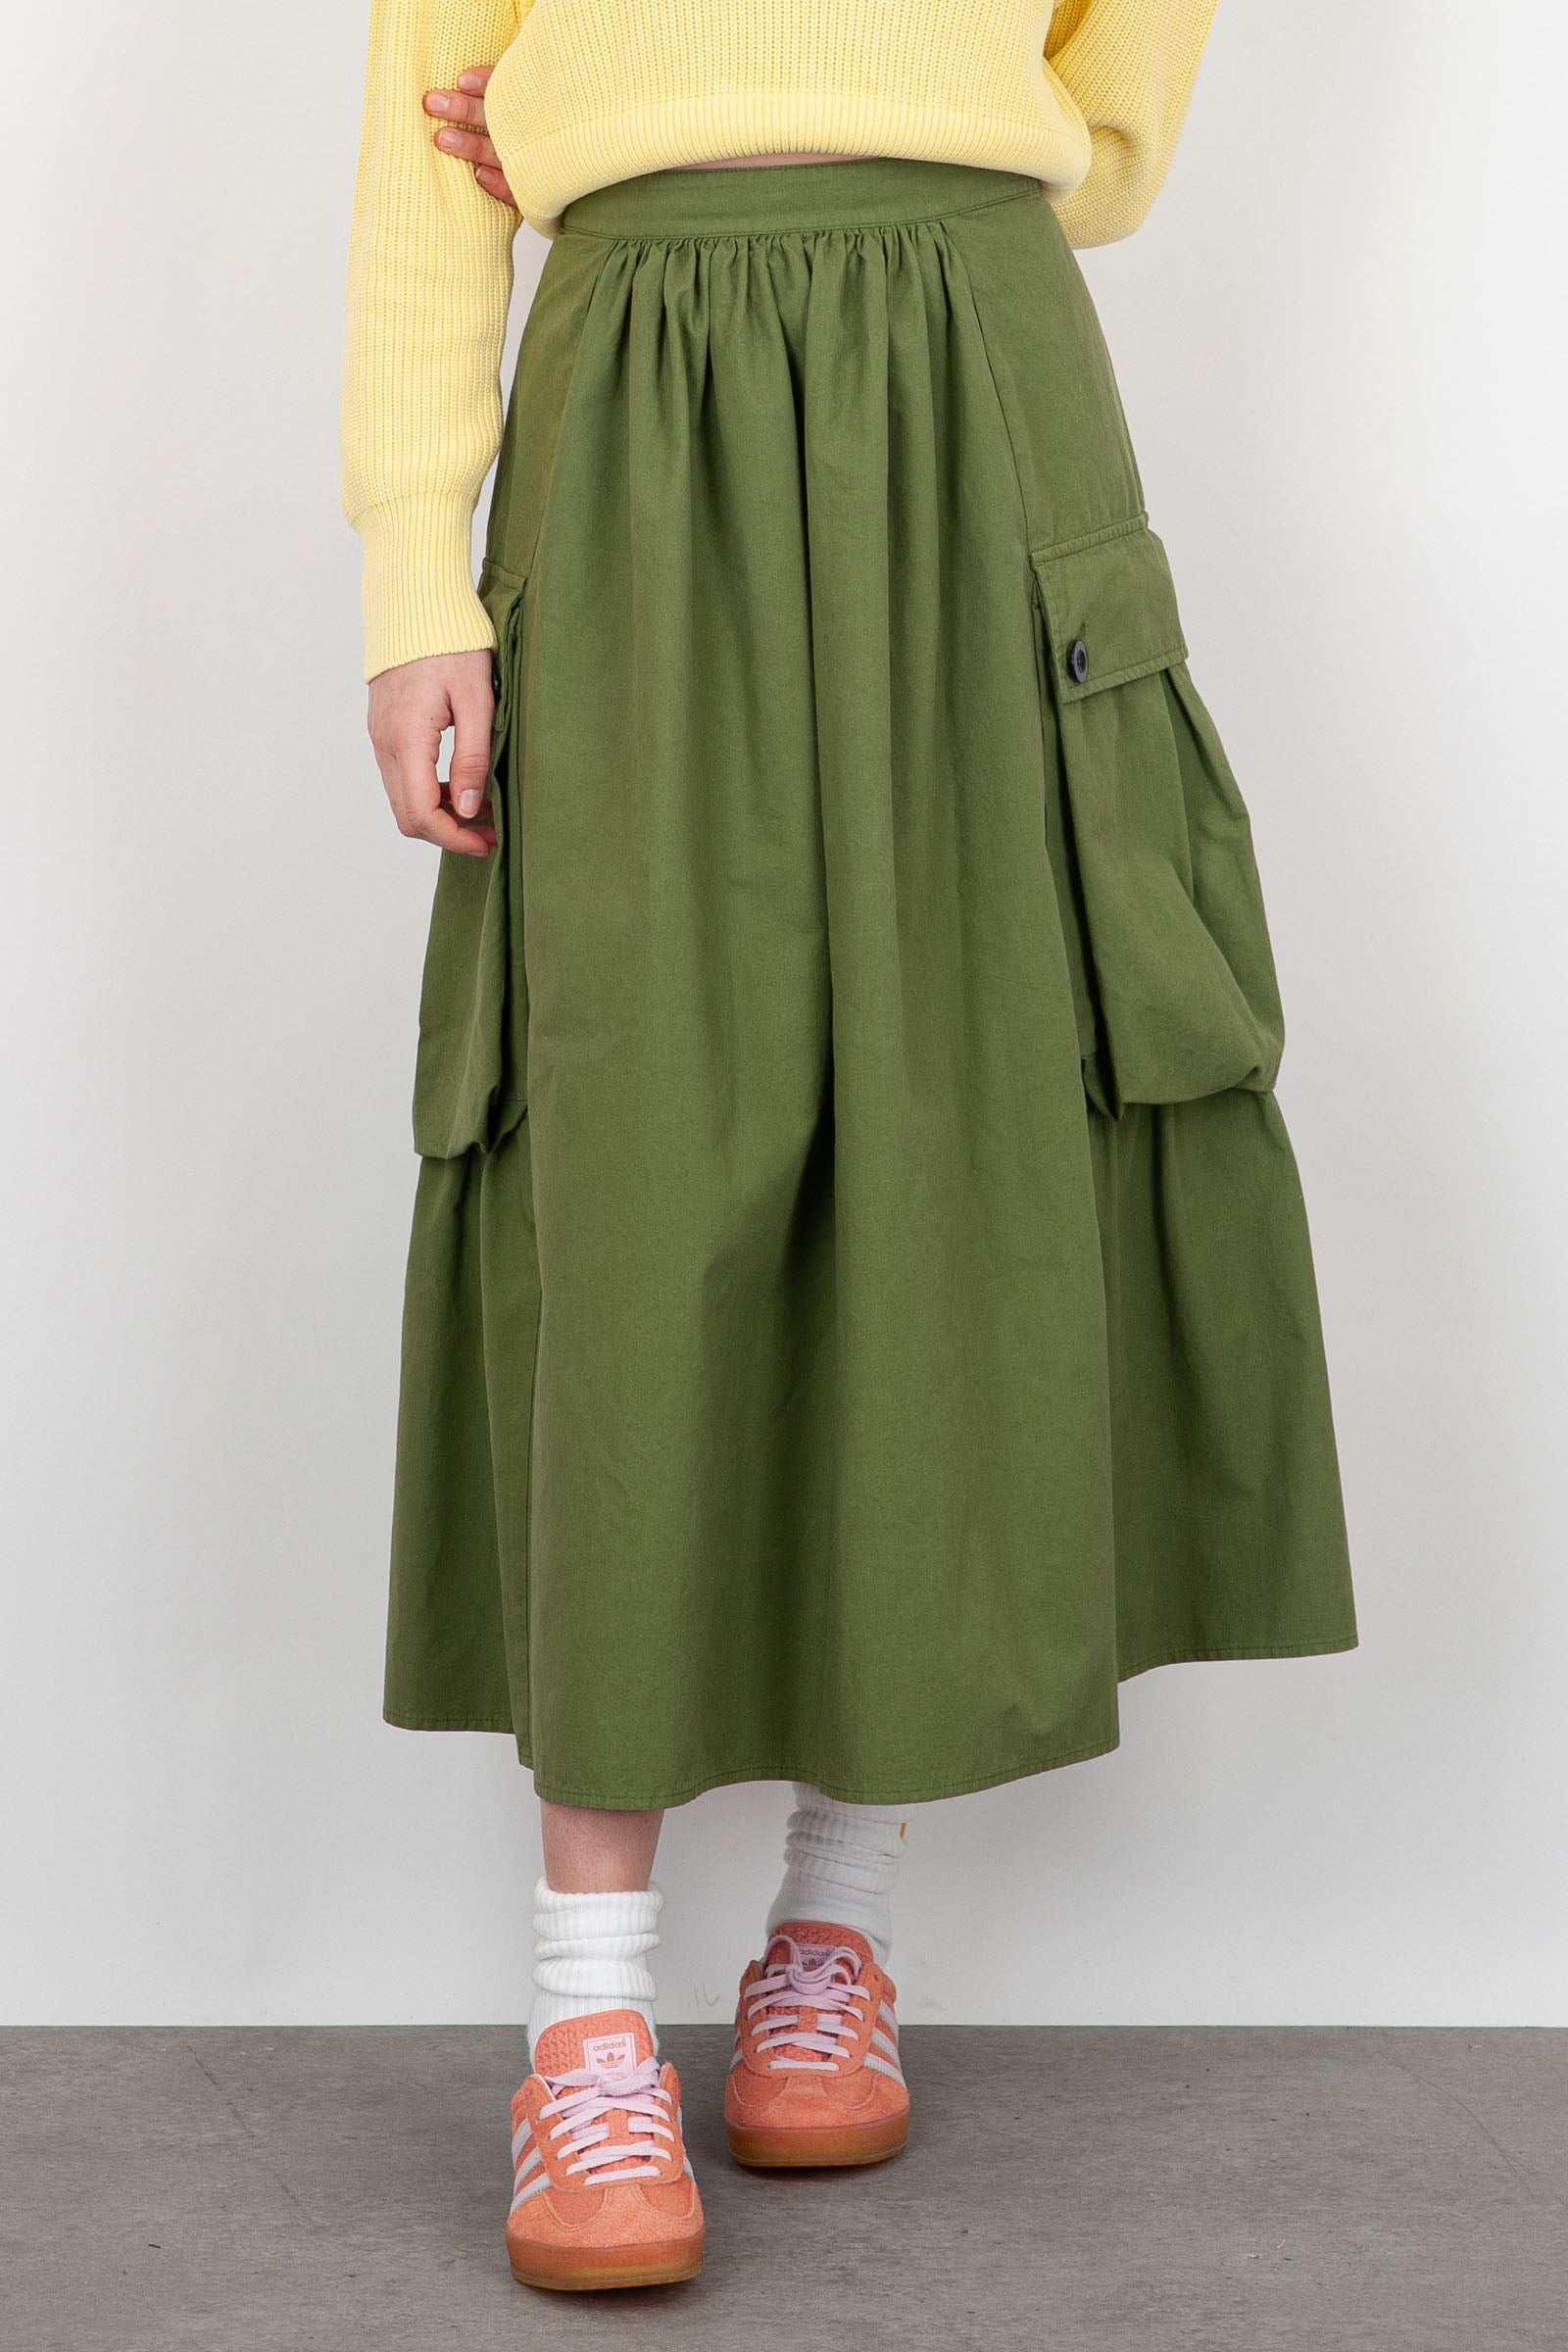 Department Five Selma Skirt in Military Green Cotton - 1